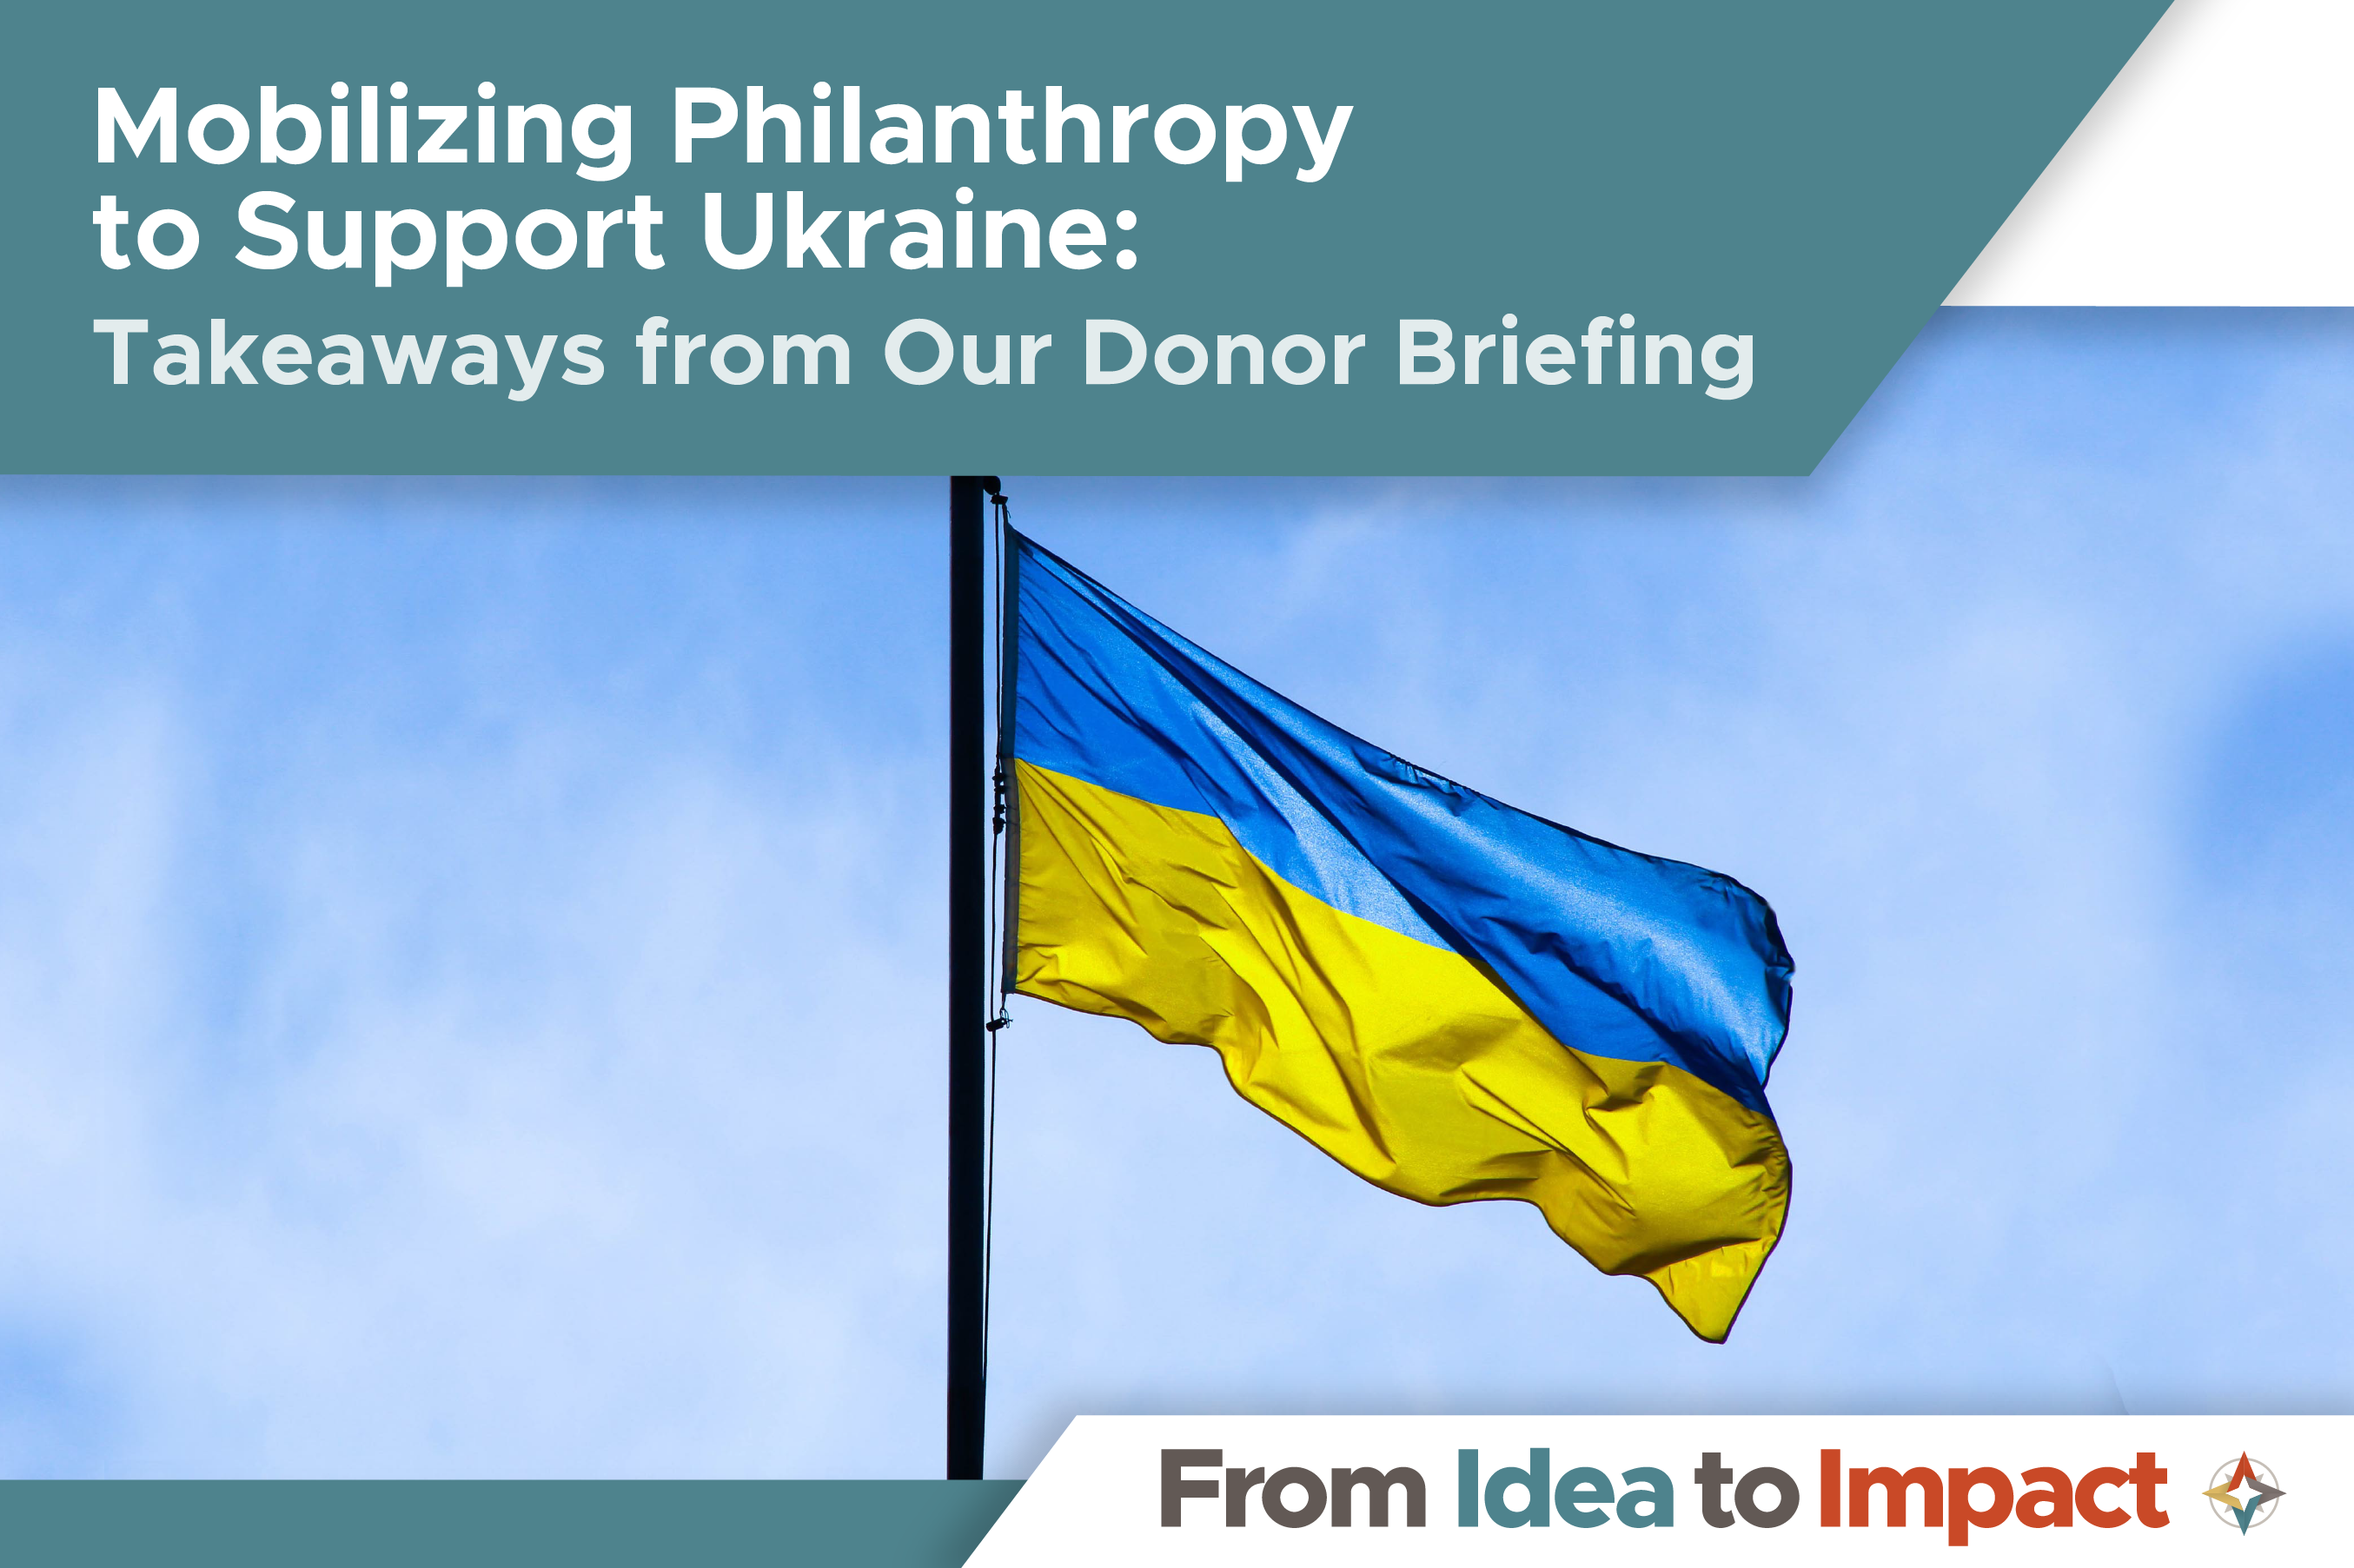 Mobilizing Philanthropy to Support Ukraine: Takeaways from Our Donor Briefing